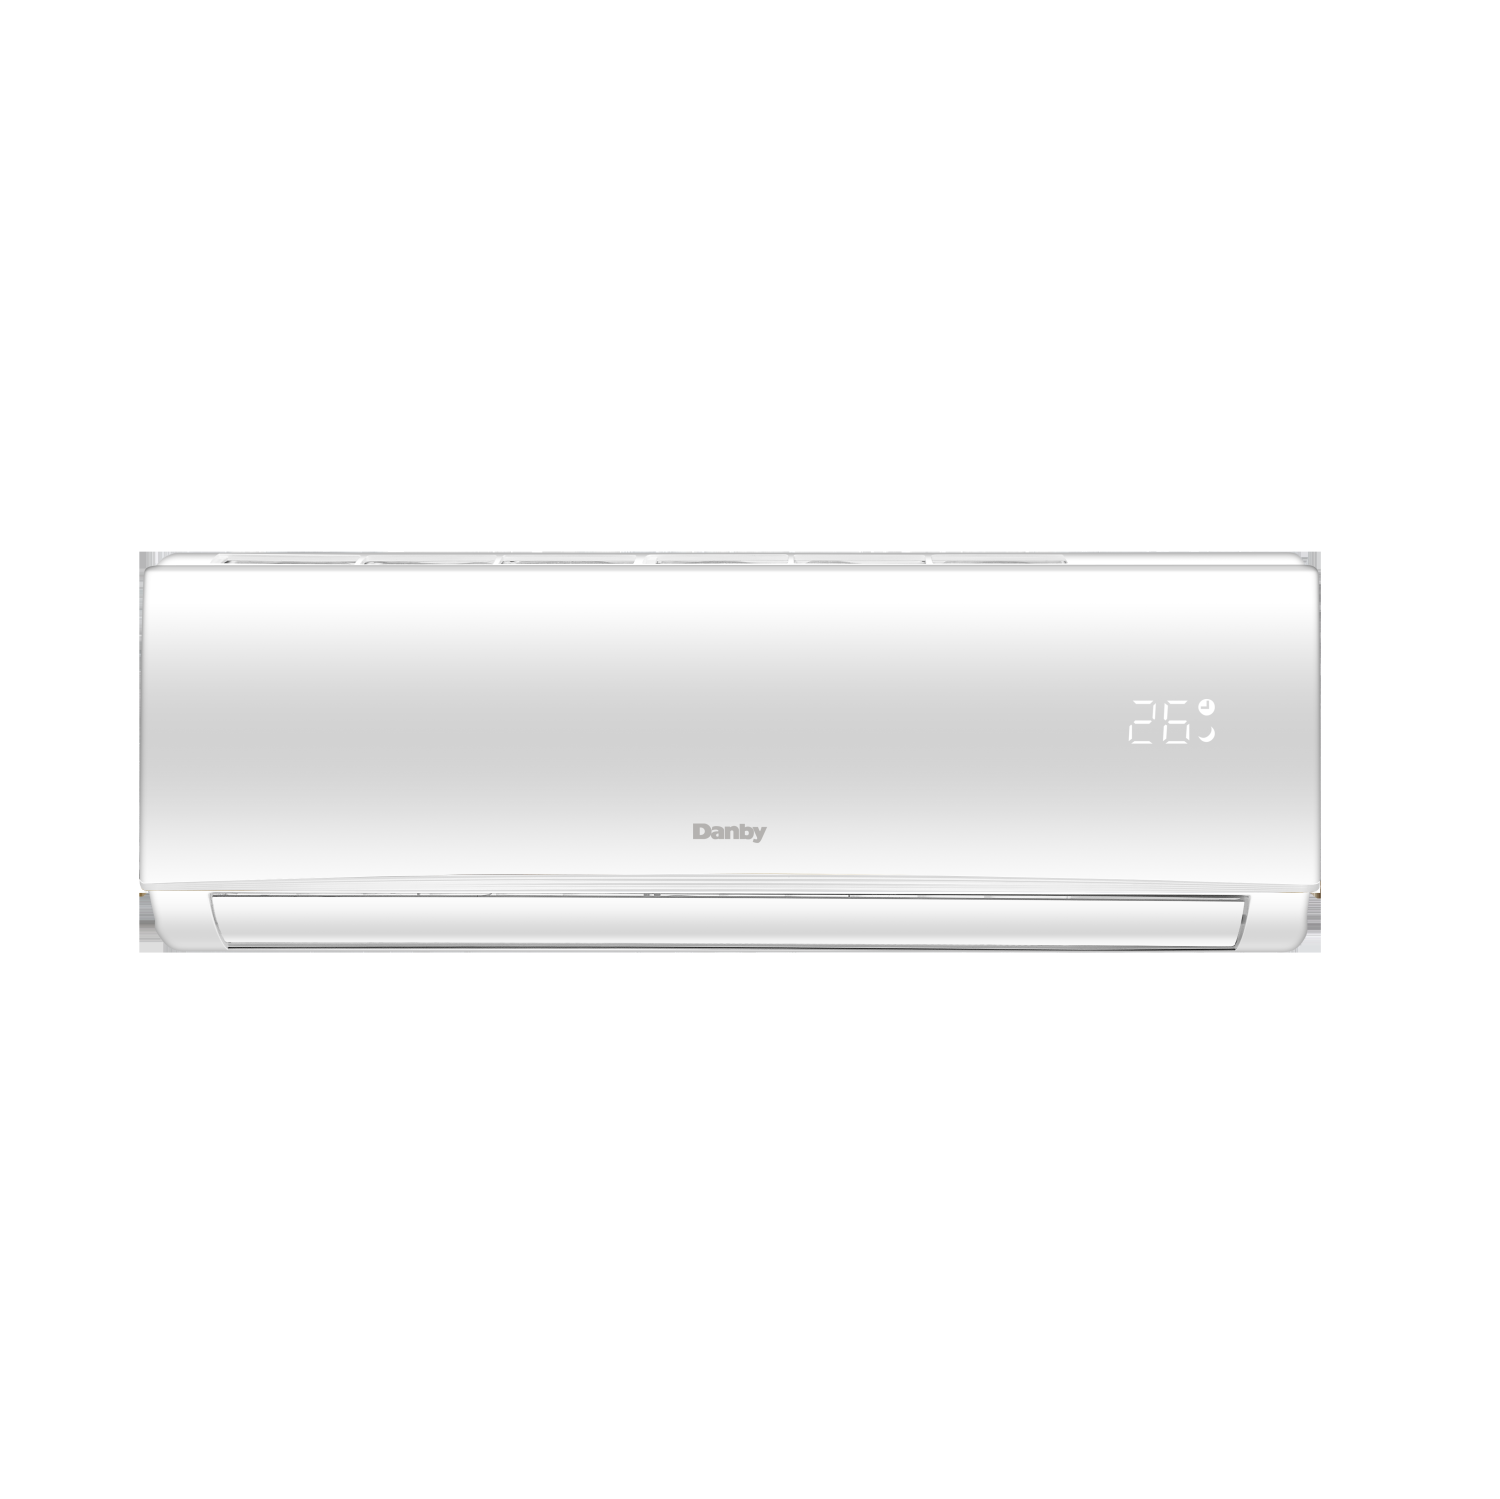 Danby 18,000 BTU Mini-Split Air Conditioner with Heat Pump and Variable Speed Inverter